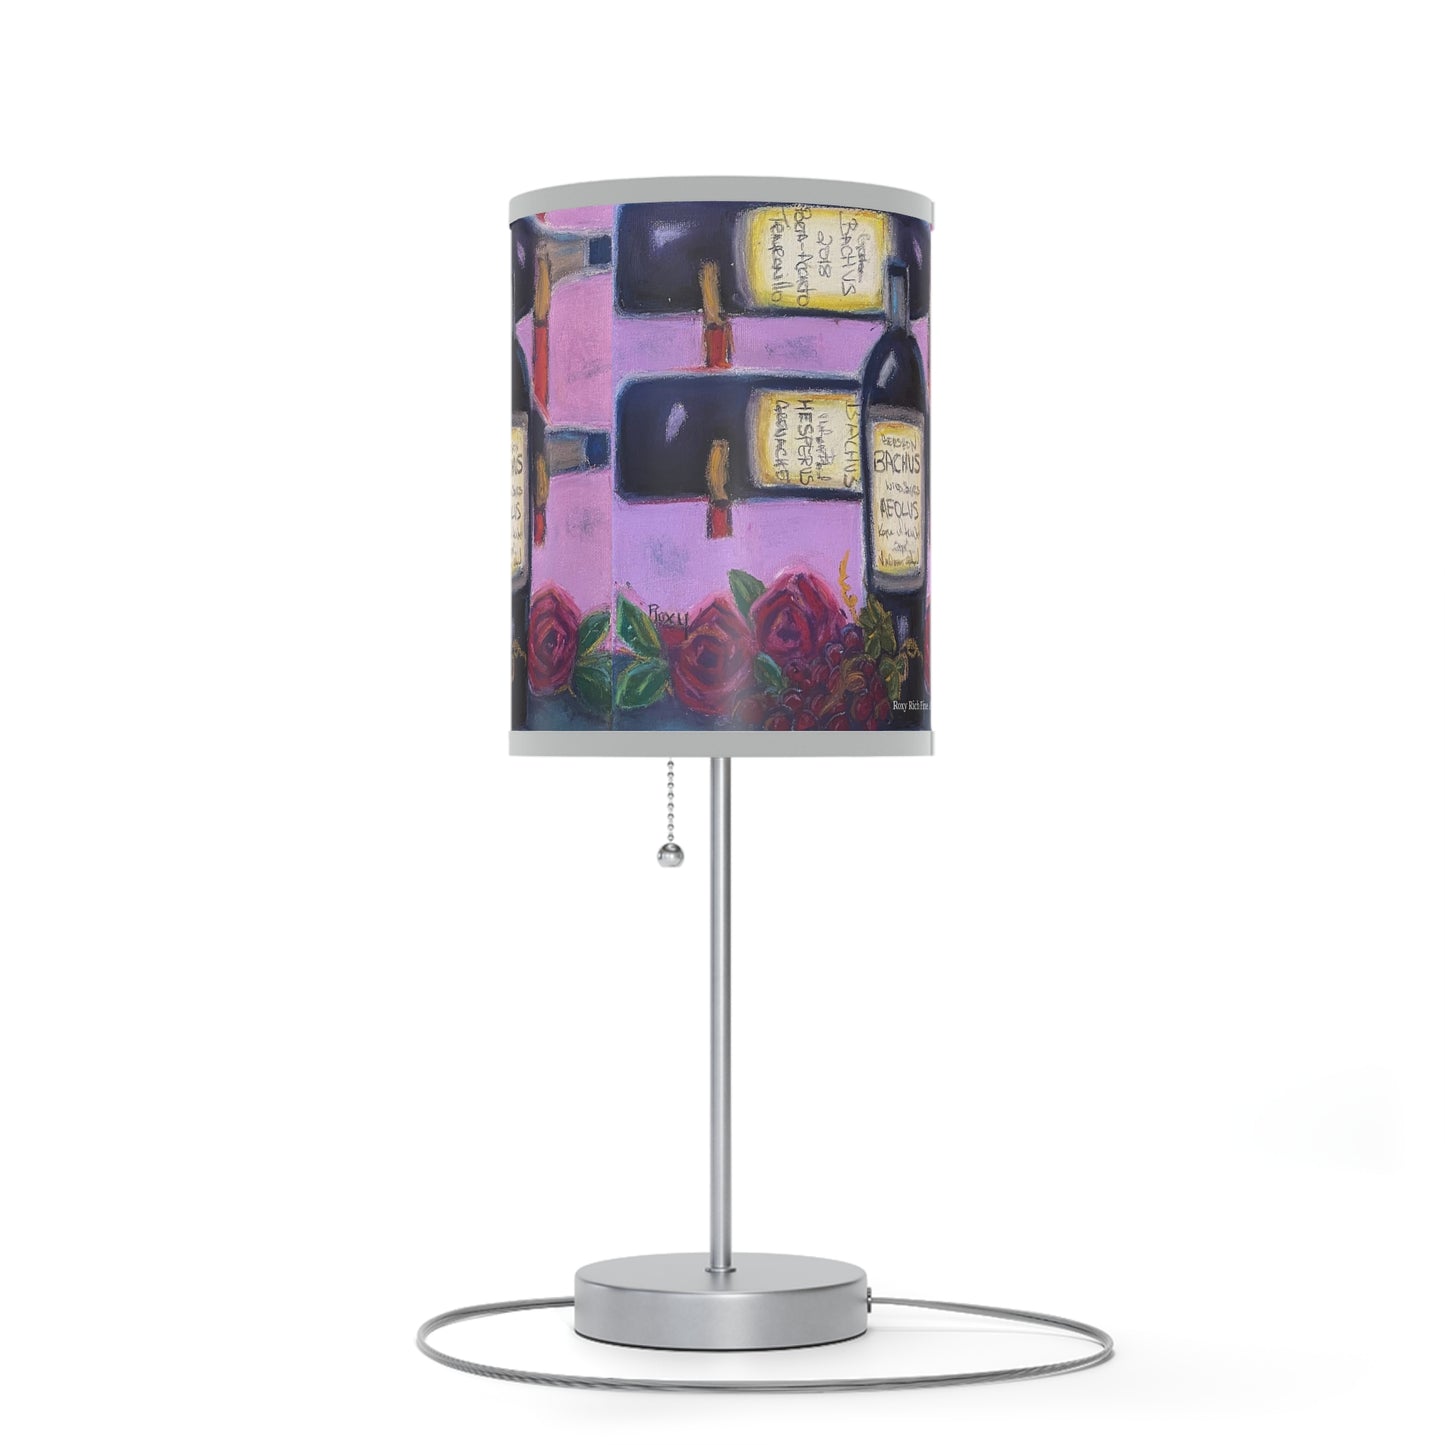 GBV Wine Rack and Roses #2 (expanded to show more roses) Lamp on a Stand, US|CA plug